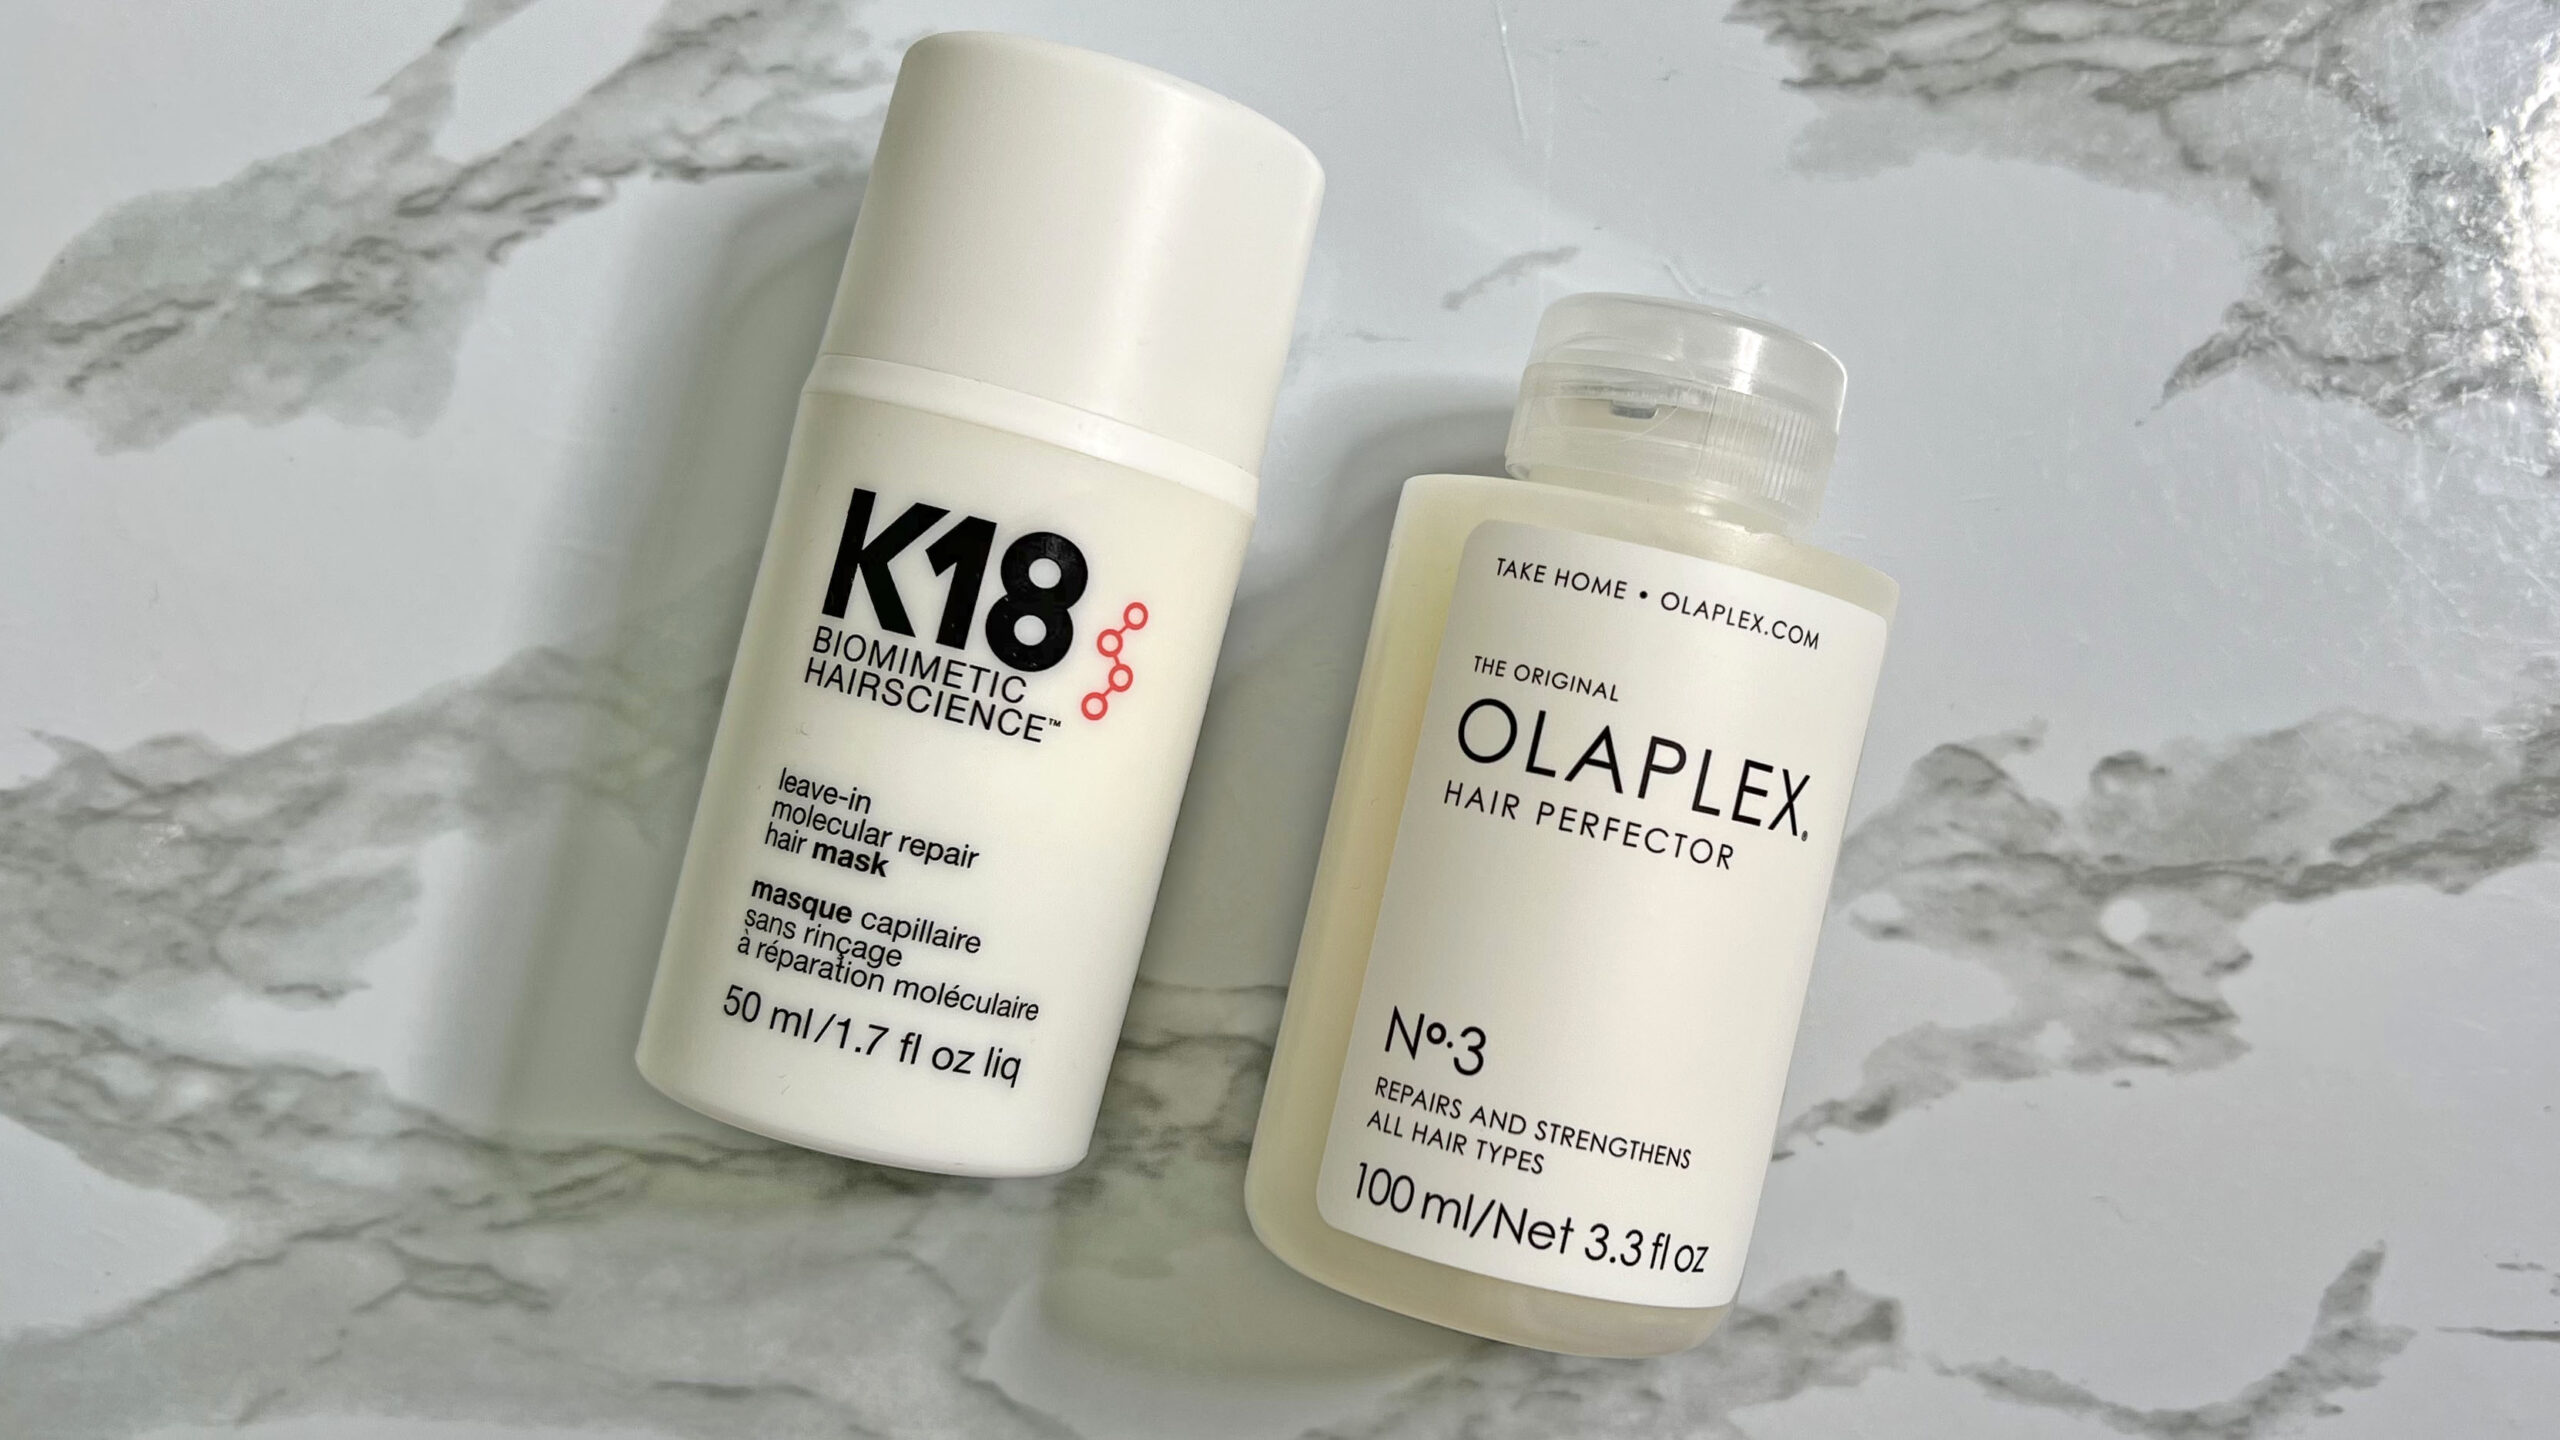 Are You olaplex vs aveda The Right Way? These 5 Tips Will Help You Answer